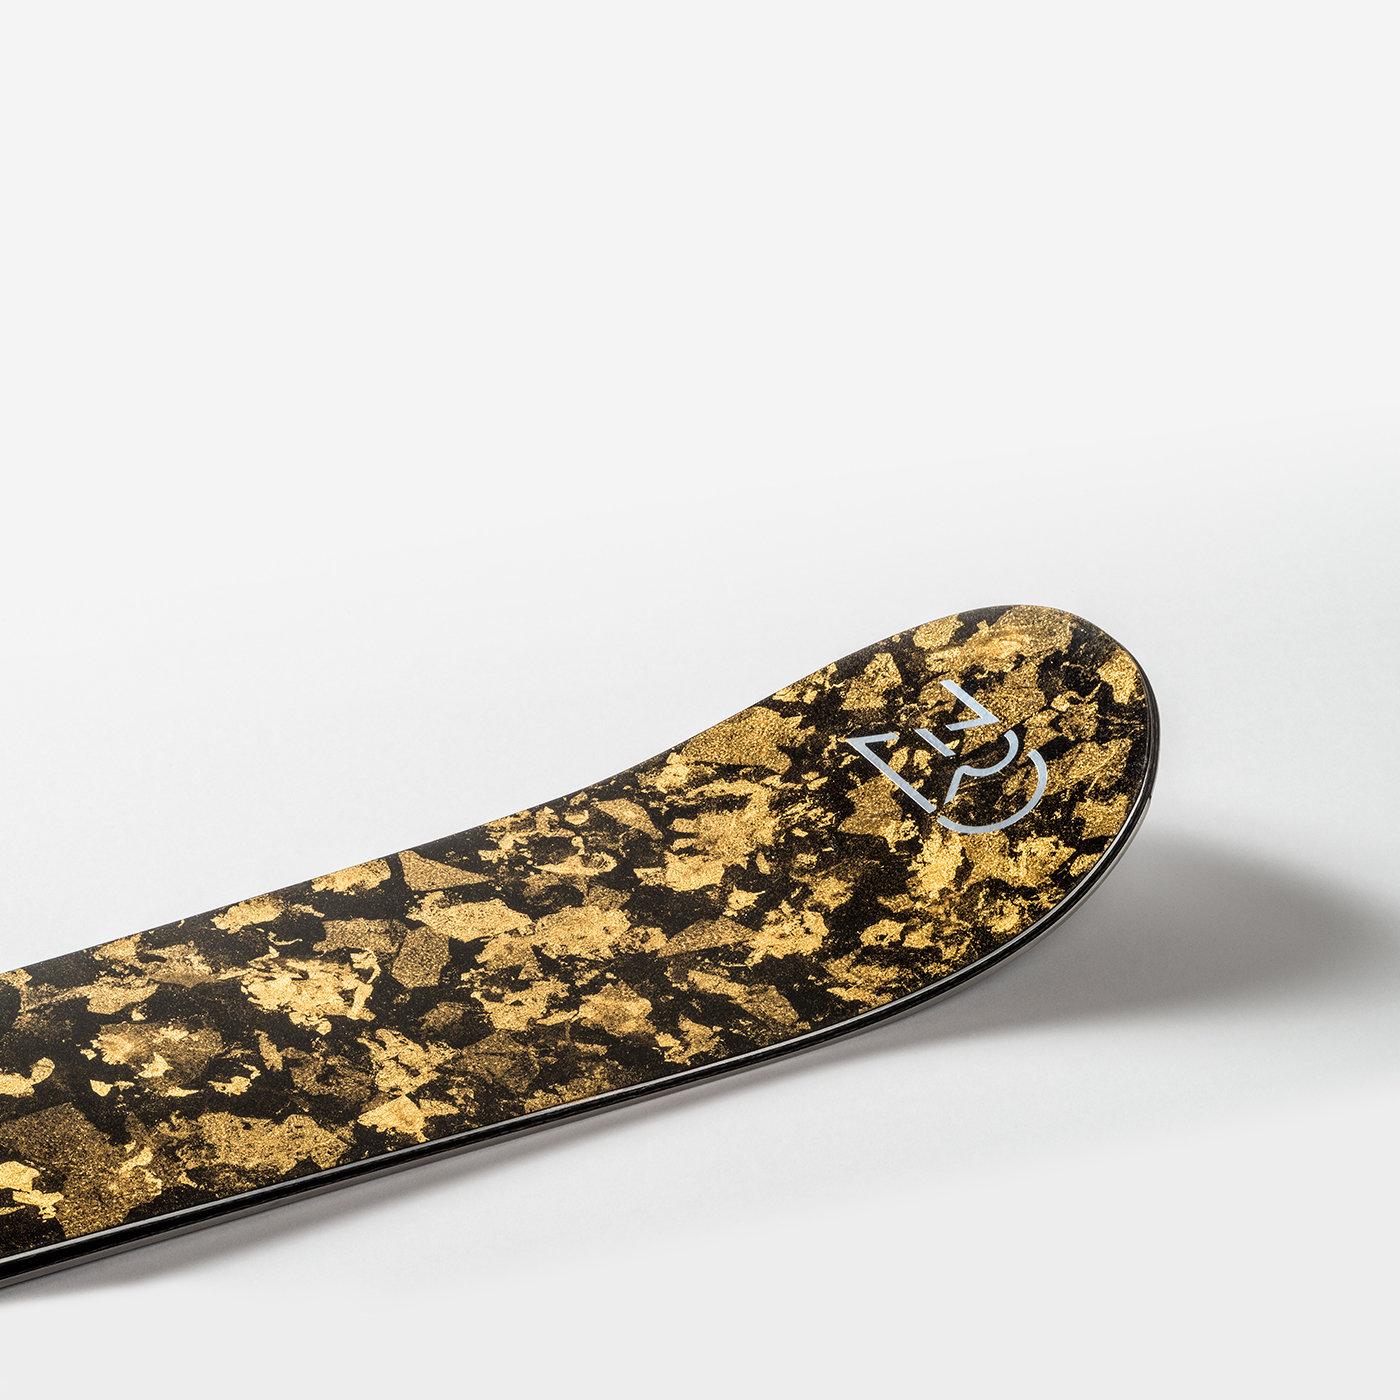 Entirely handcrafted by expert artisans in Zero's workshop in the Italian Alps, these one-of-a-kind skis are a superb example of unmatched craftsmanship and exclusive design that will stand the test of time. The core of the Mydas skis is crafted